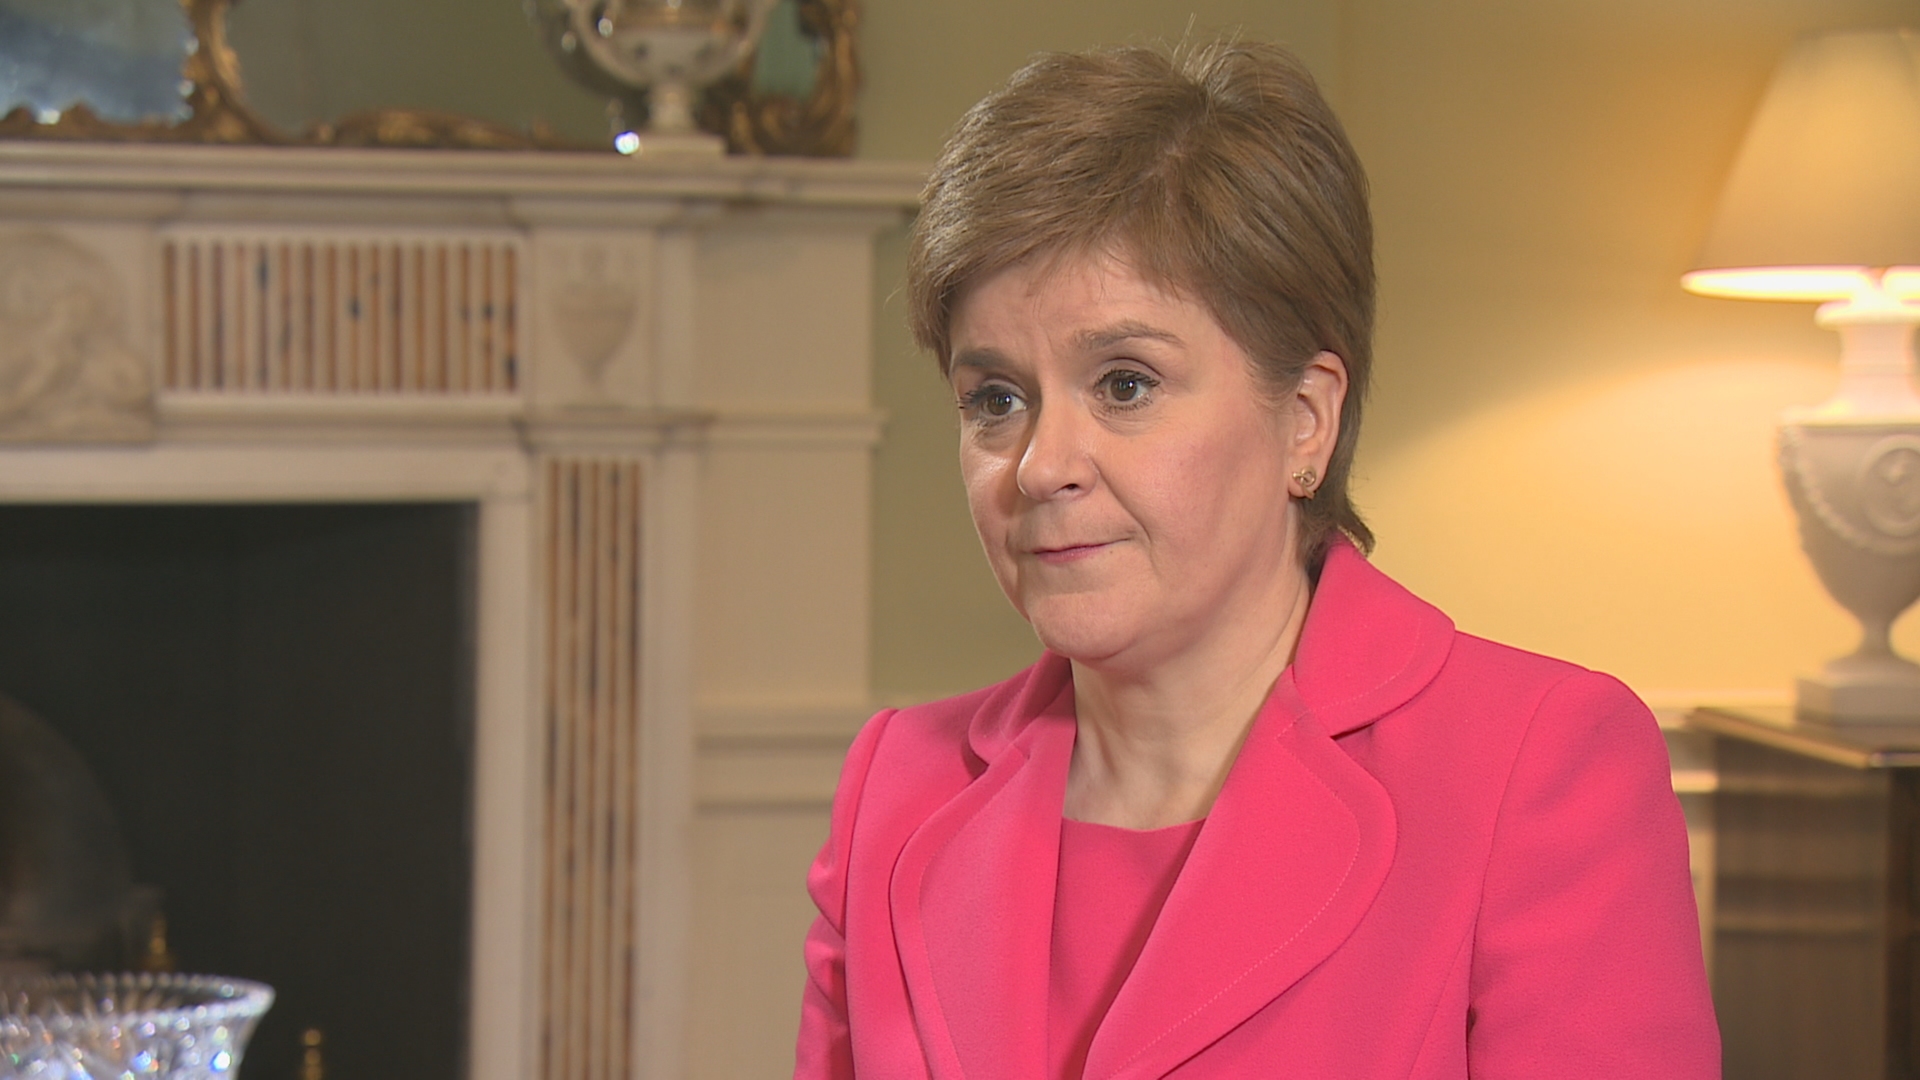 The First Minister reinforced the importance of women's autonomy and the right to choose